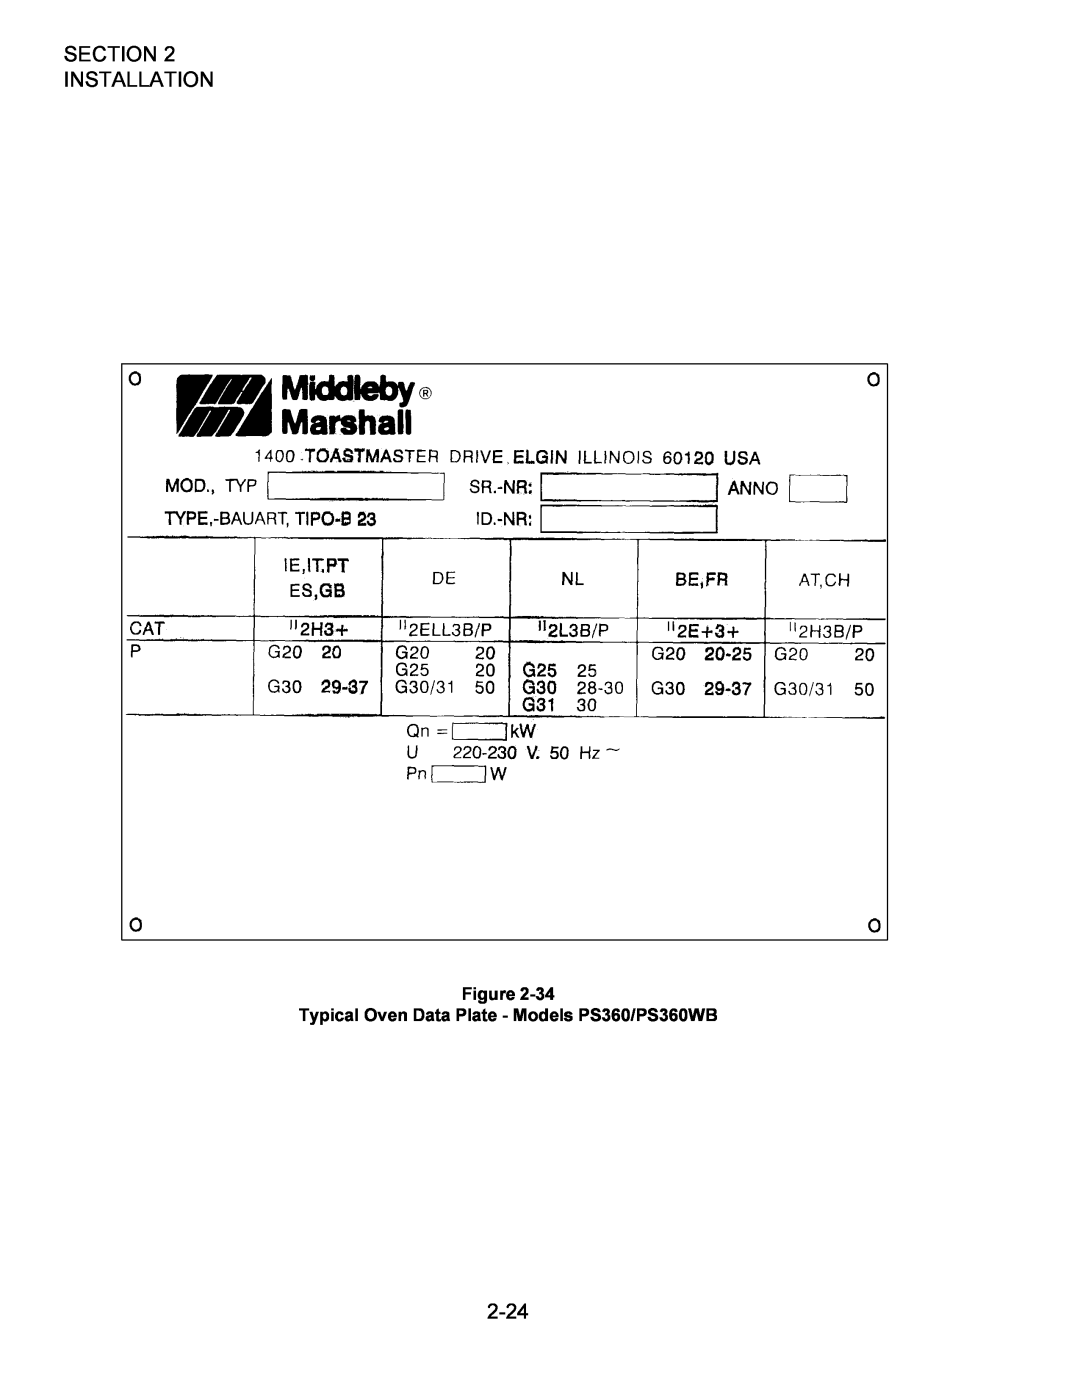 Middleby Marshall owner manual 2-24, Typical Oven Data Plate - Models PS360/PS360WB, Section Installation 